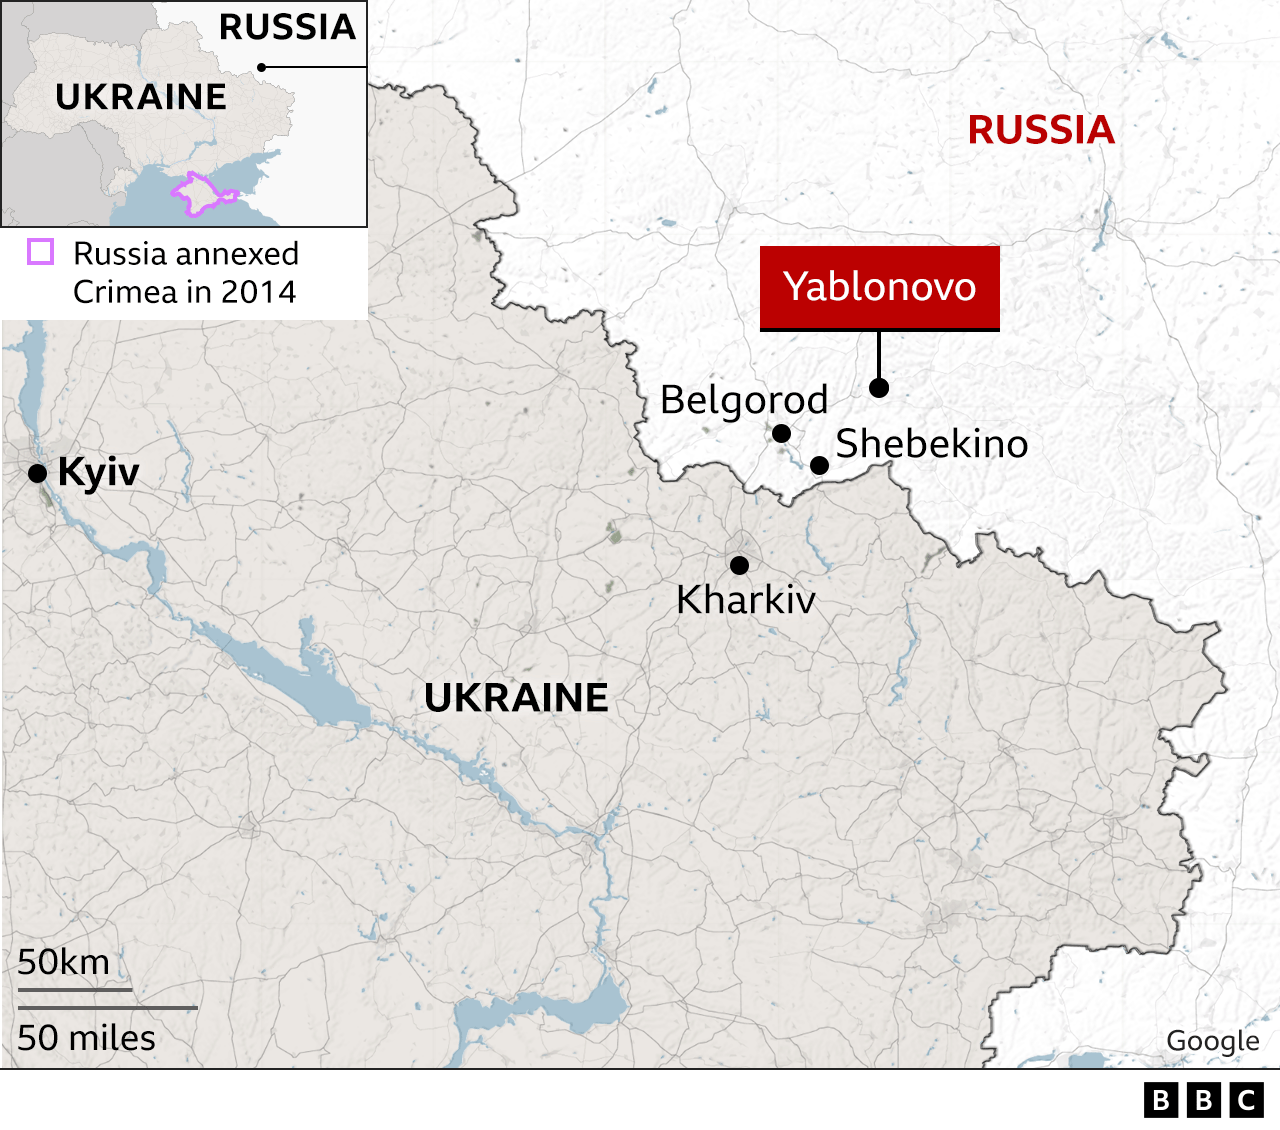 Map of Russia showing location of crash and proximity to Ukraine